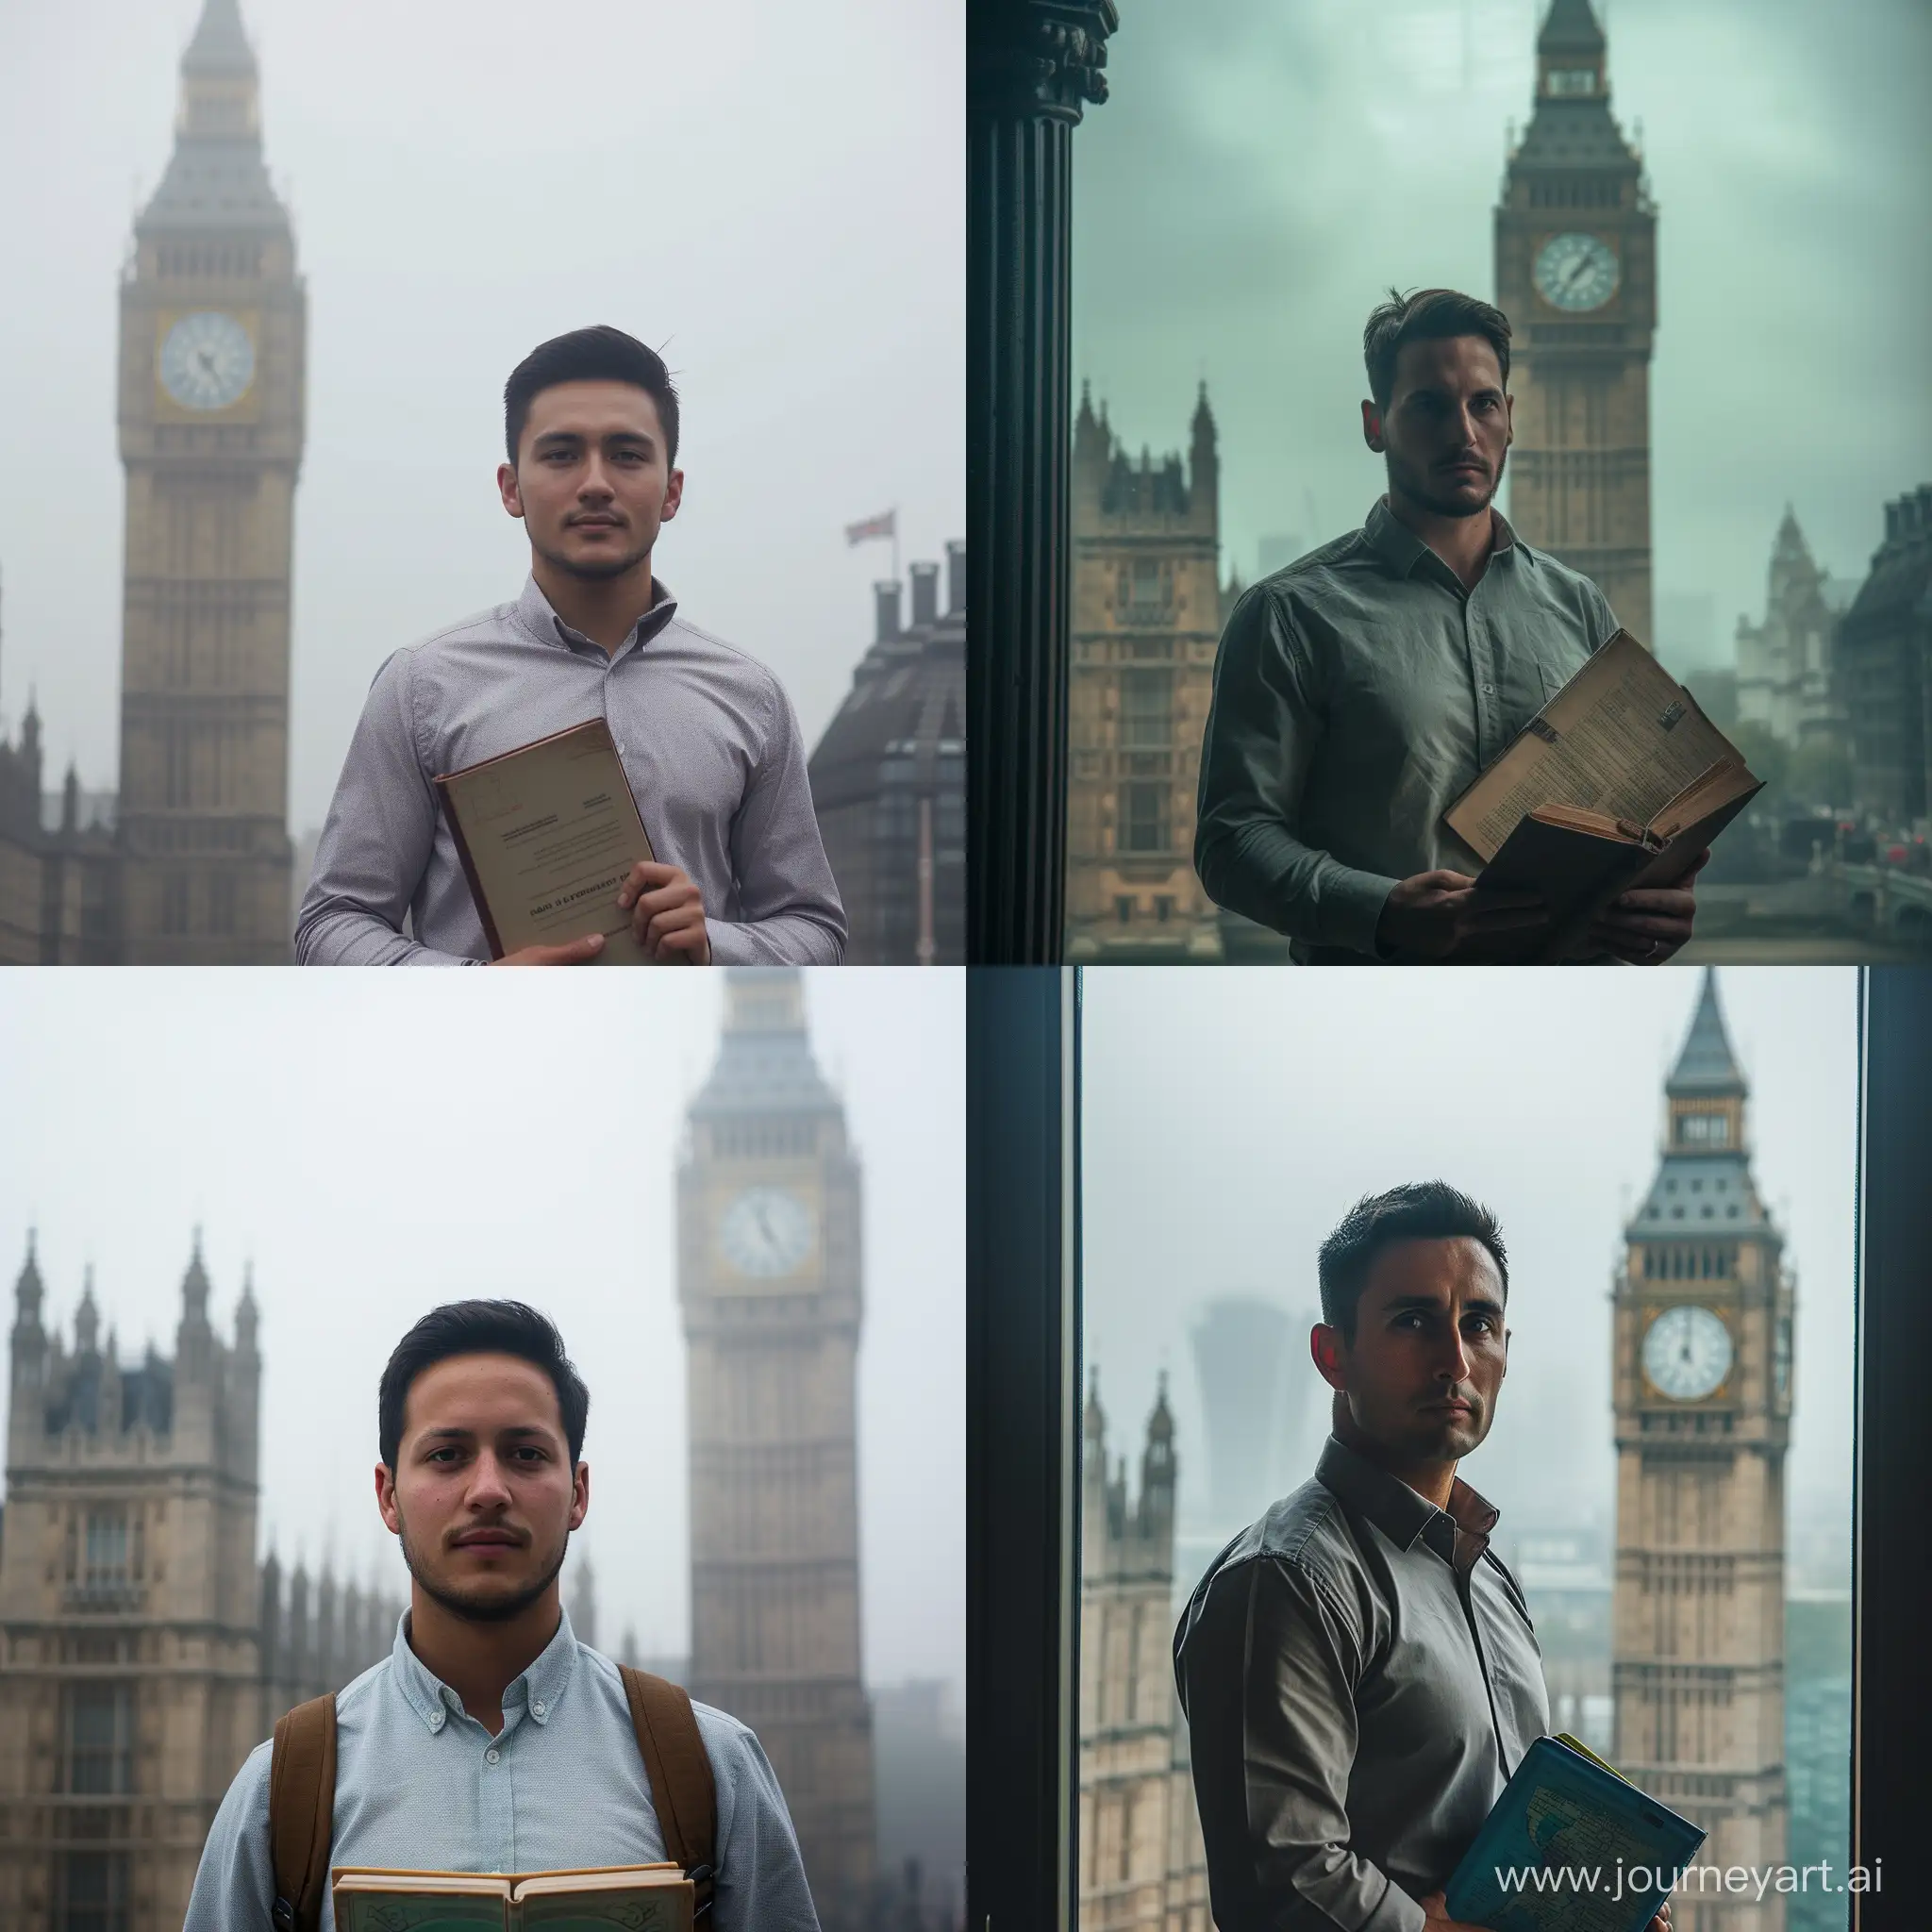 Man, in front of Big ben, foggy background medium shot, upper body, wear shirt, hold a book, board background, English grammar ،indoors, dark hair, man's body occupies 30% of the image, face the camera, indoor, English grammar background 